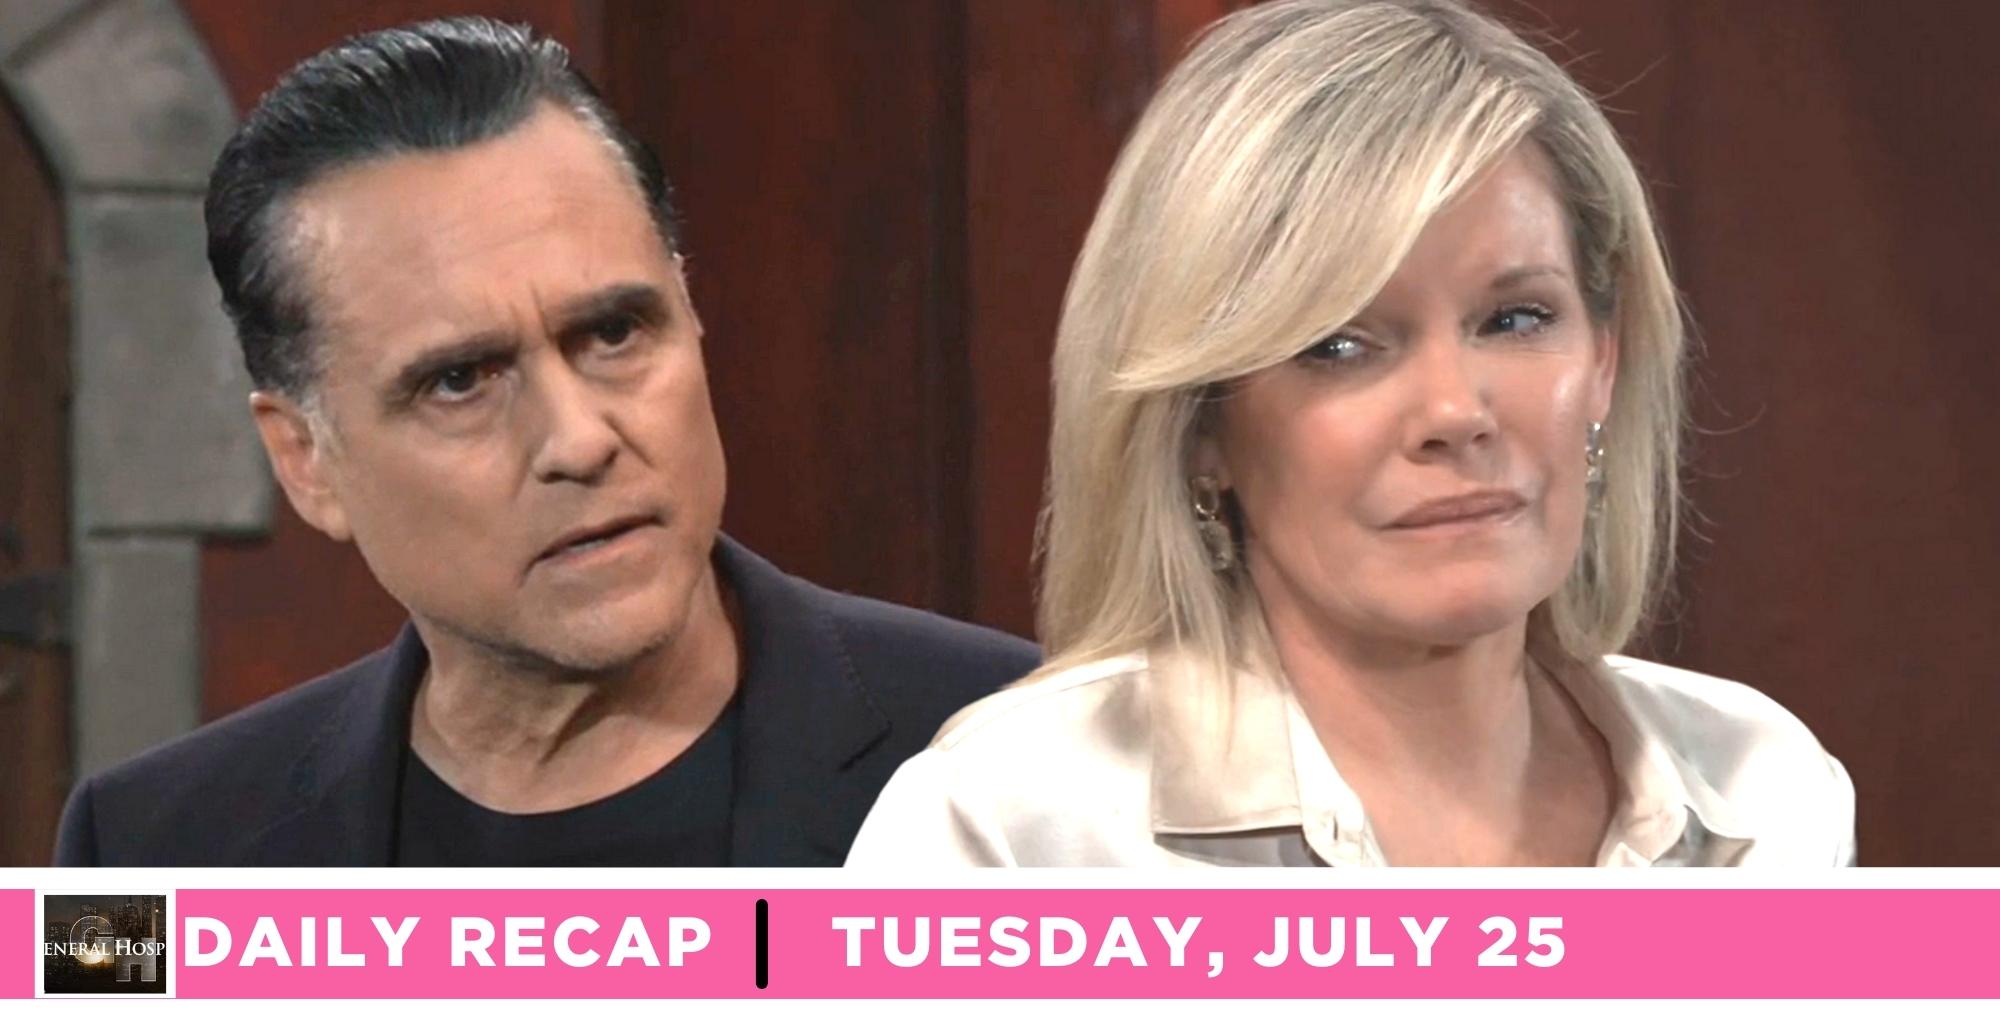 the general hospital recap for july 25 2023 has an angry sonny corinthos and a confessing ava jerome.